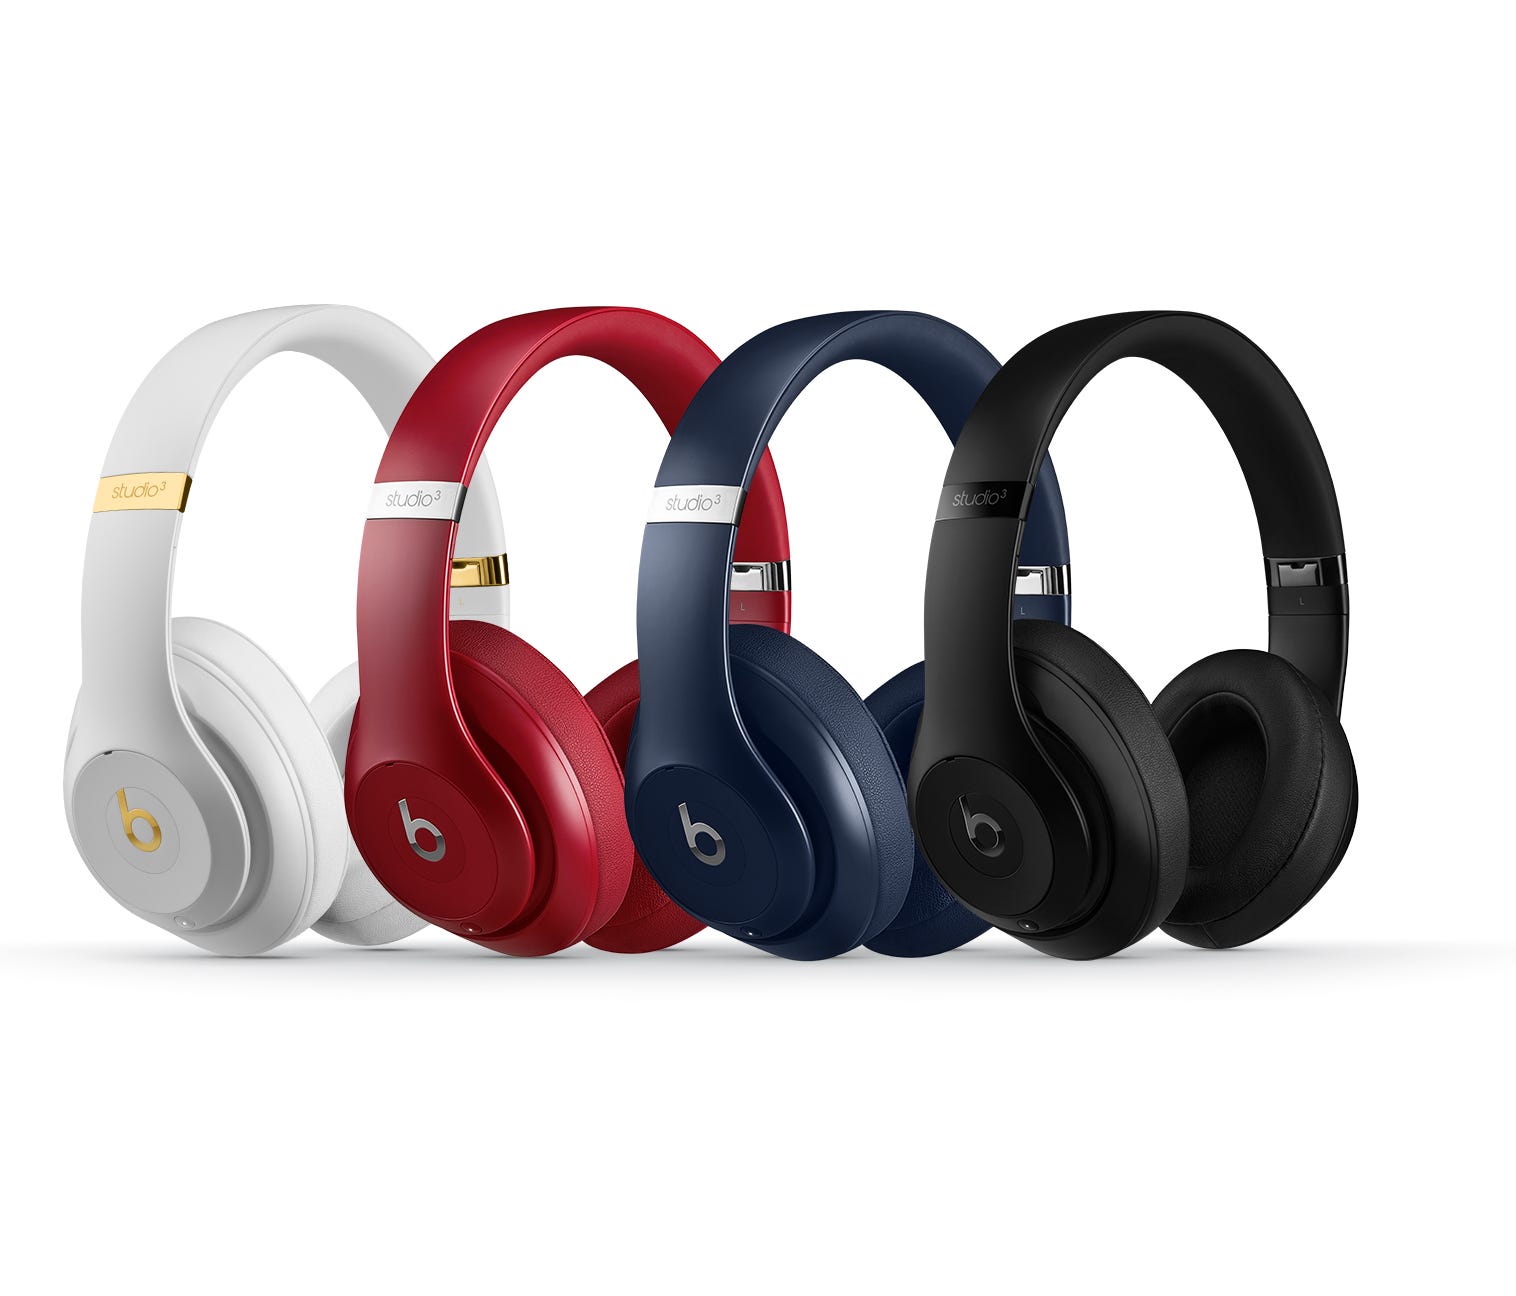 The new Beats Studio3 Wireless headphones ($349.95) offer improved noise cancellation, Bluetooth connectivity and battery life.